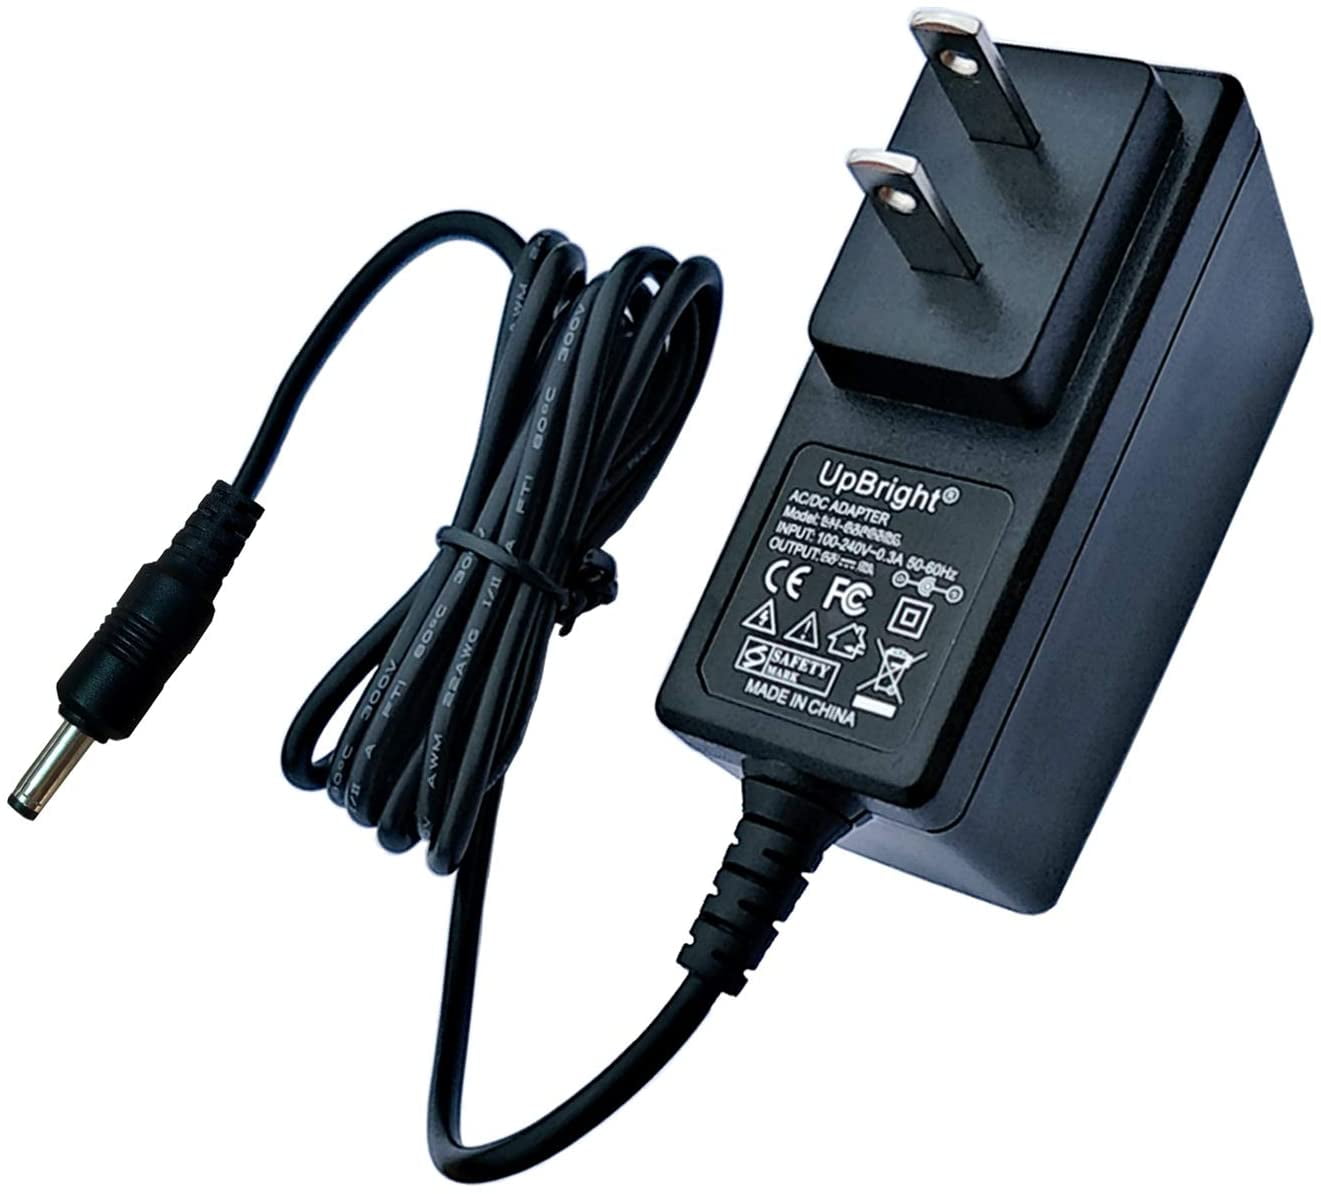 USB Charger Cable Mains Power Supply for GD Gemini Devices GEM7008-8G-512M-A13 